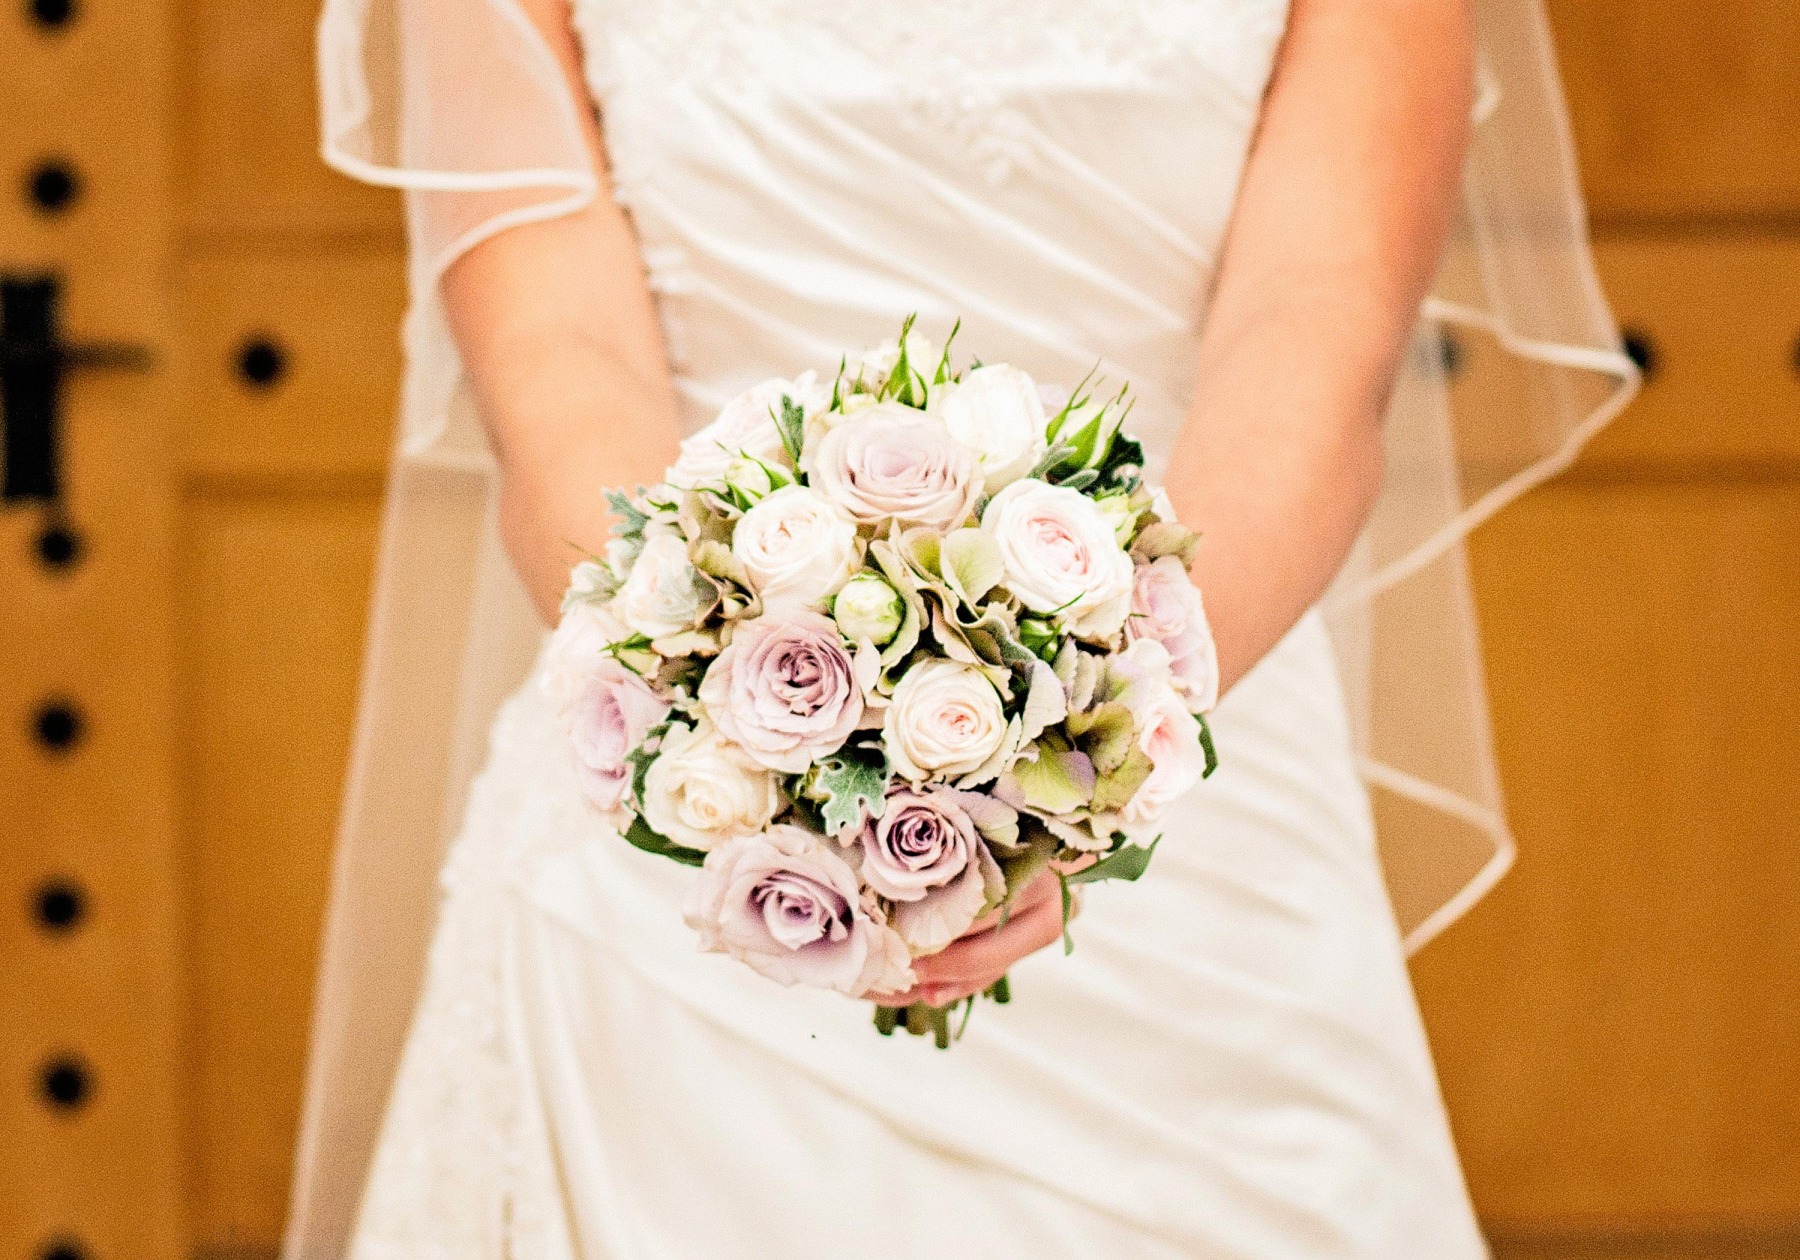 A close up of a bouquet of dusky pink and white flowers